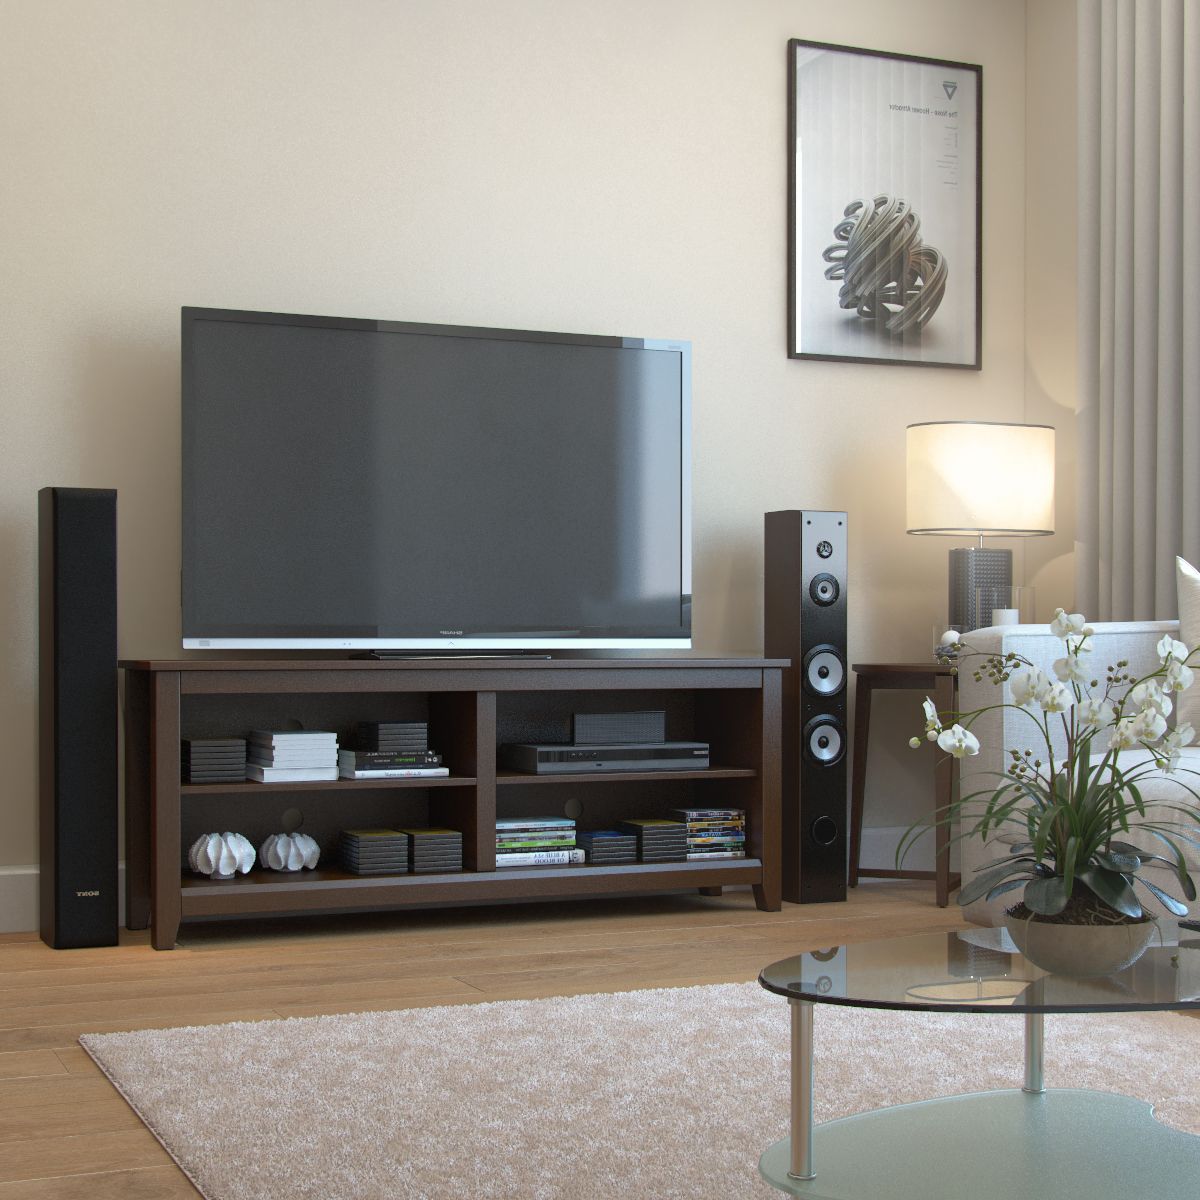 Mission 58 Inch Wood Tv Console In Espresso With Kamari Tv Stands For Tvs Up To 58" (Gallery 16 of 20)